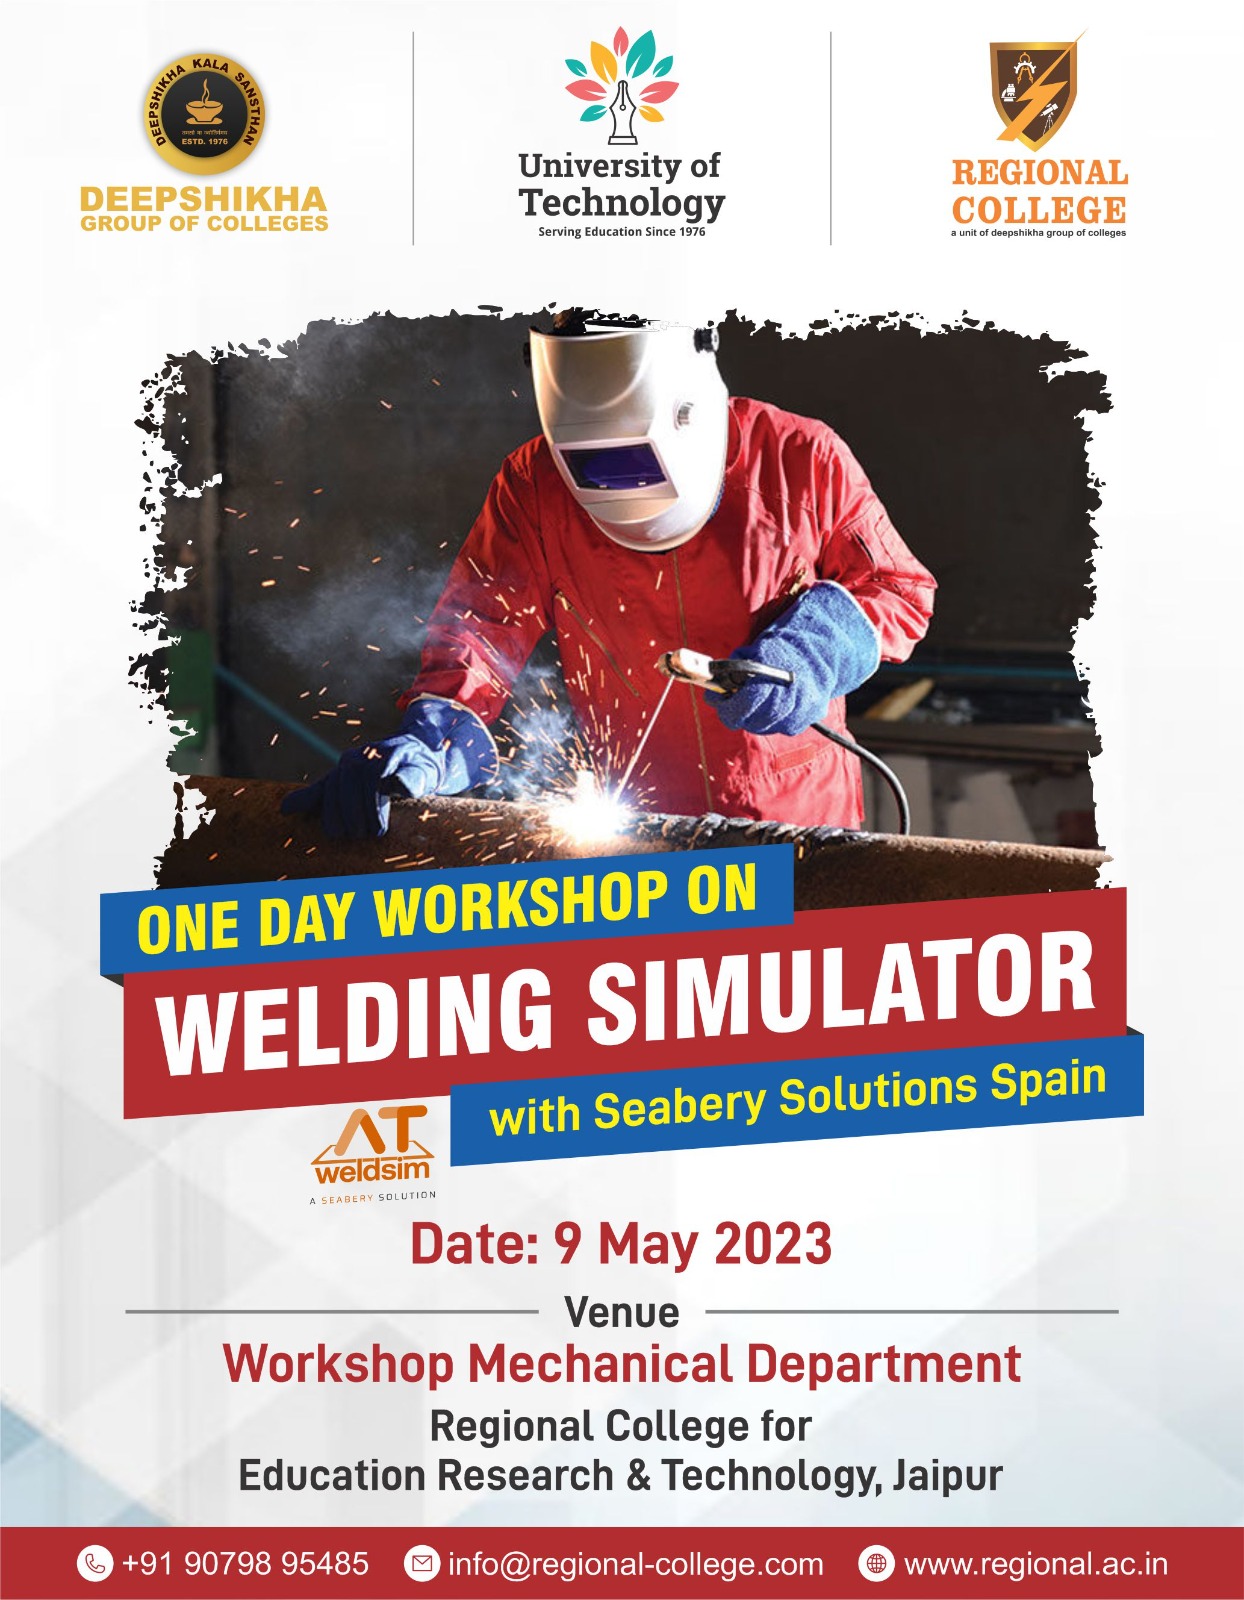 Regional College always believes in bringing opportunities for young minds to learn, innovate, and challenge their potential. With such a commitment, Regional College is organizing a one-day workshop in association with Seabery Solutions Spain on Welding Simulators, an incredible opportunity for young mechanical engineering students to learn all about welding techniques. This workshop will be organized on the 9th of May, 2023 at the Workshop Mechanical Department of the Regional College for Education Research and Technology, Jaipur. This welding training workshop is a step toward helping students learn and gain practical welding experience. This workshop will also help raise the number of qualified welders in the industry. This incredible opportunity has been put forth for the students to gain a deeper understanding of the welding process and have better hands-on experience with the same.